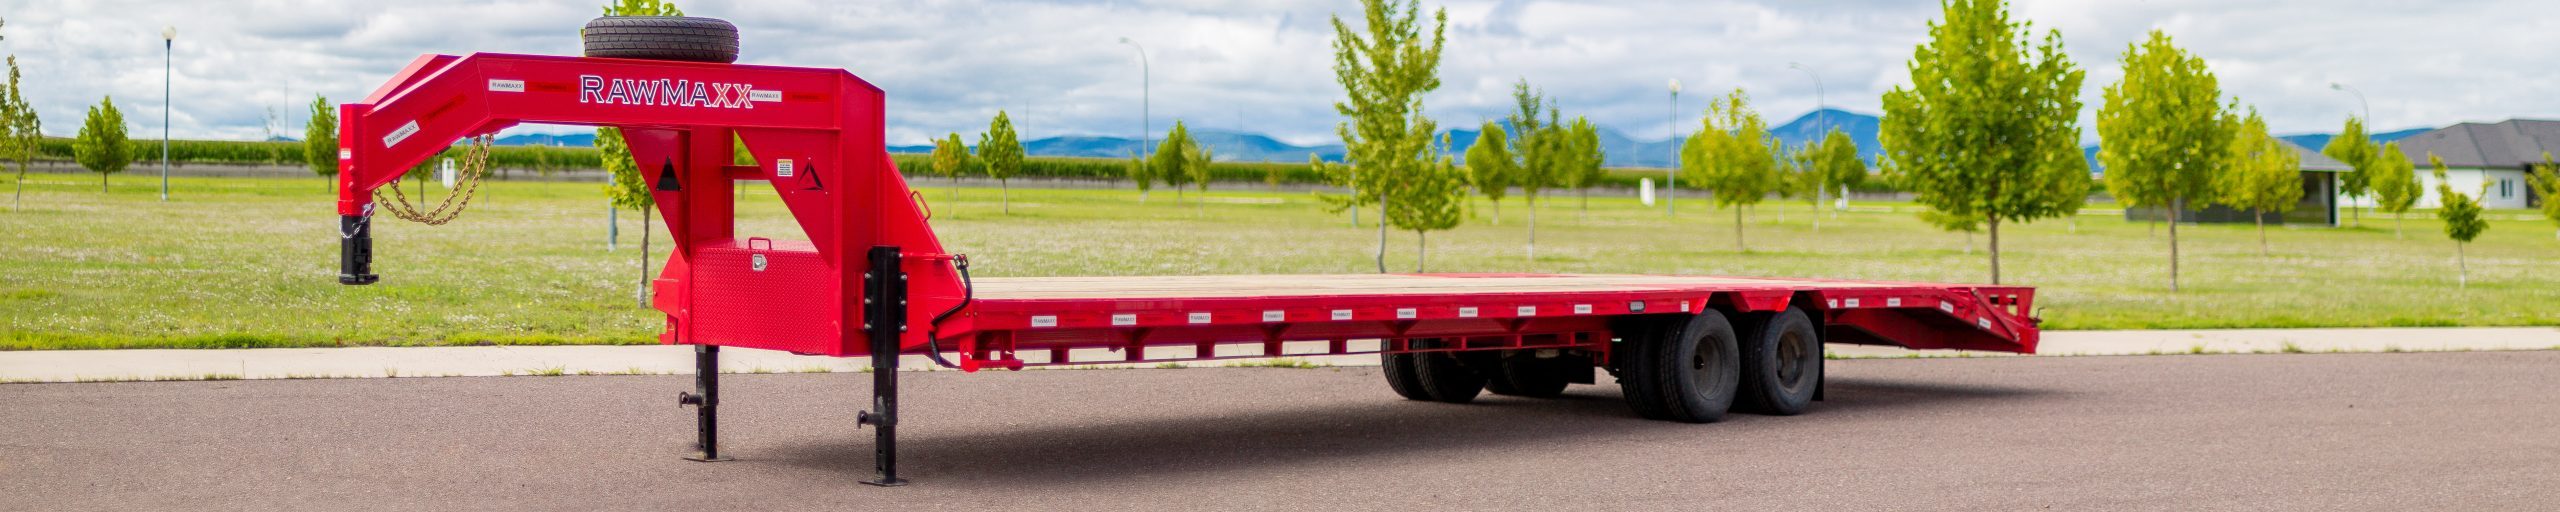 Best Performance Gooseneck Trailers for Sale Near You in USA - RawMaxx